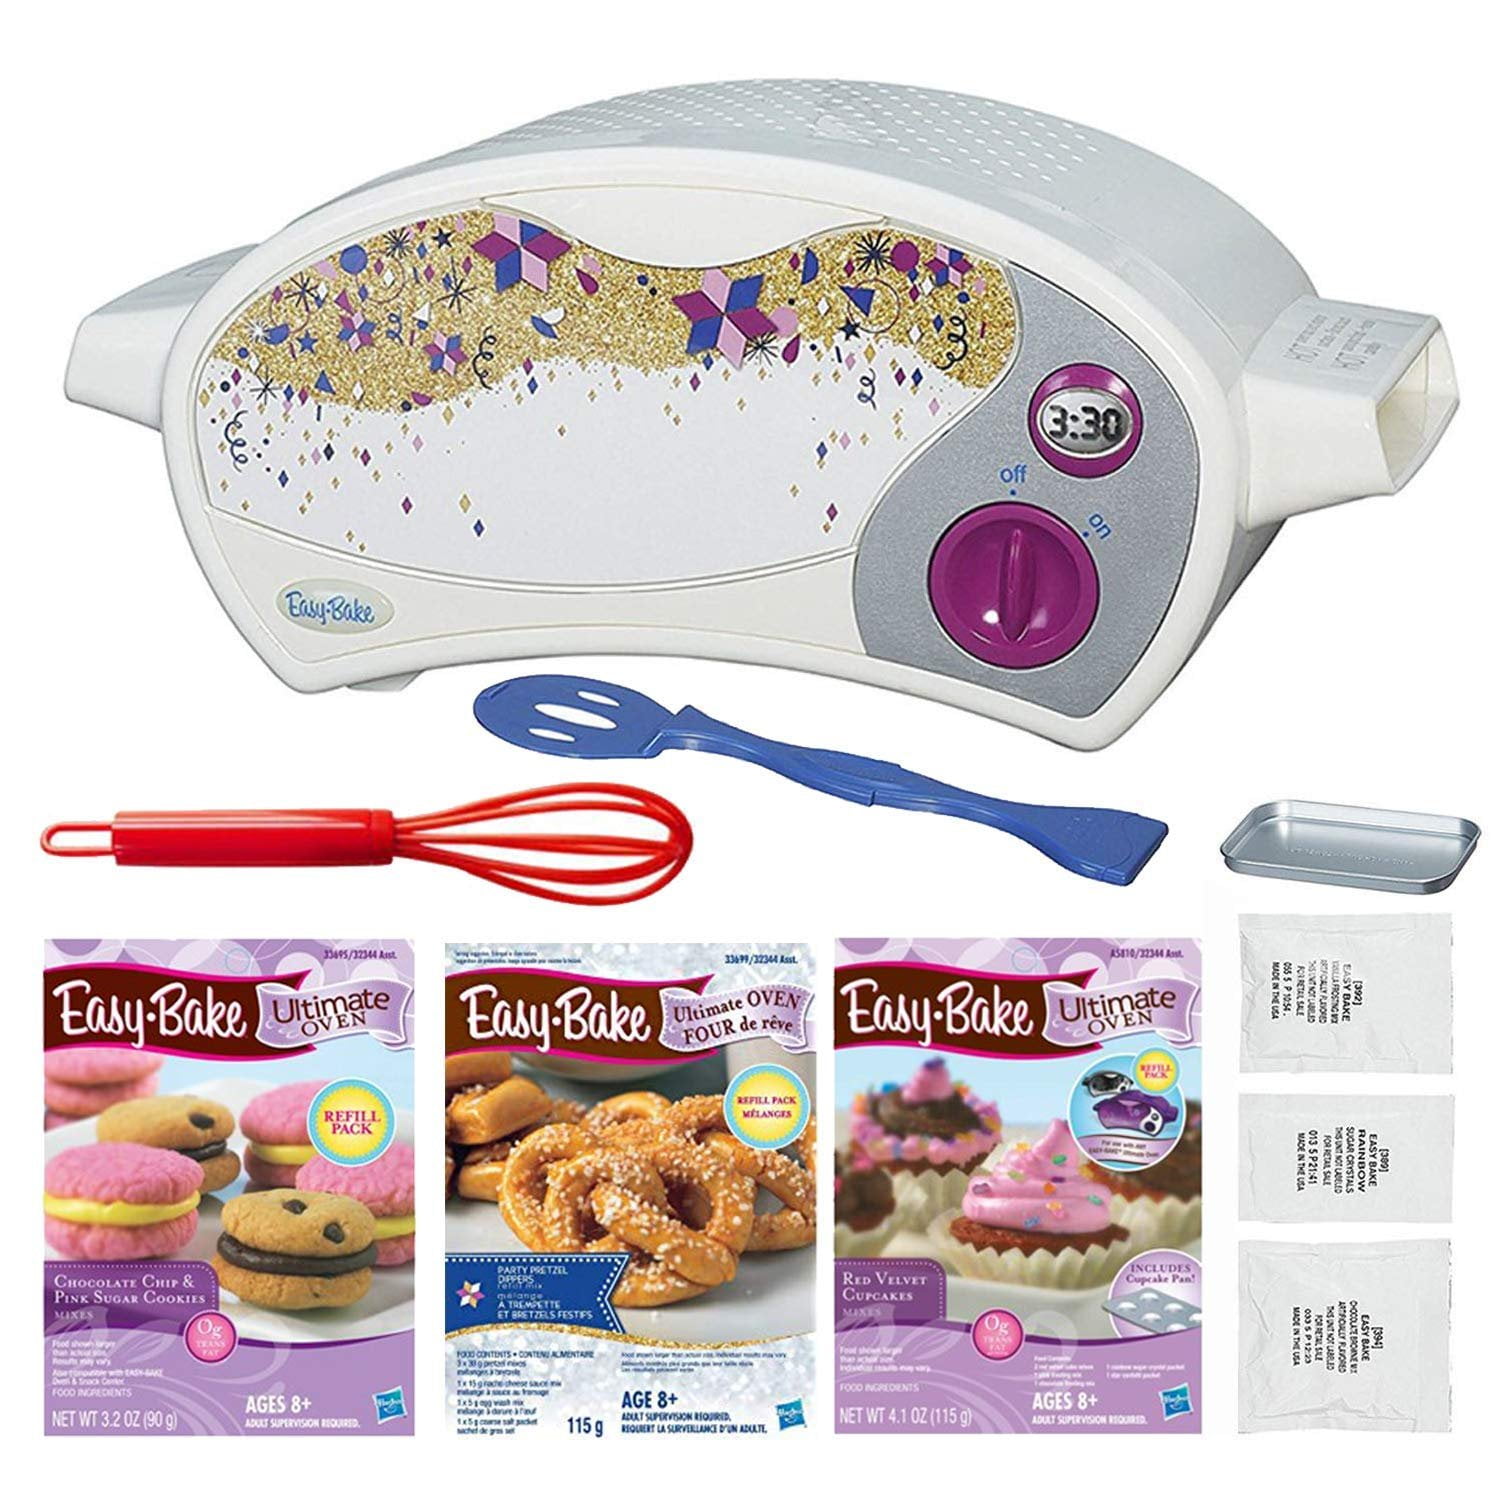 FIVE DEALS Easy Bake Oven Star Edition + Chocolate Chip and Pink Sugar Refill + Red Velvet Cupcakes Refill + Party Pretzel Refill Pack + Mini Whisk